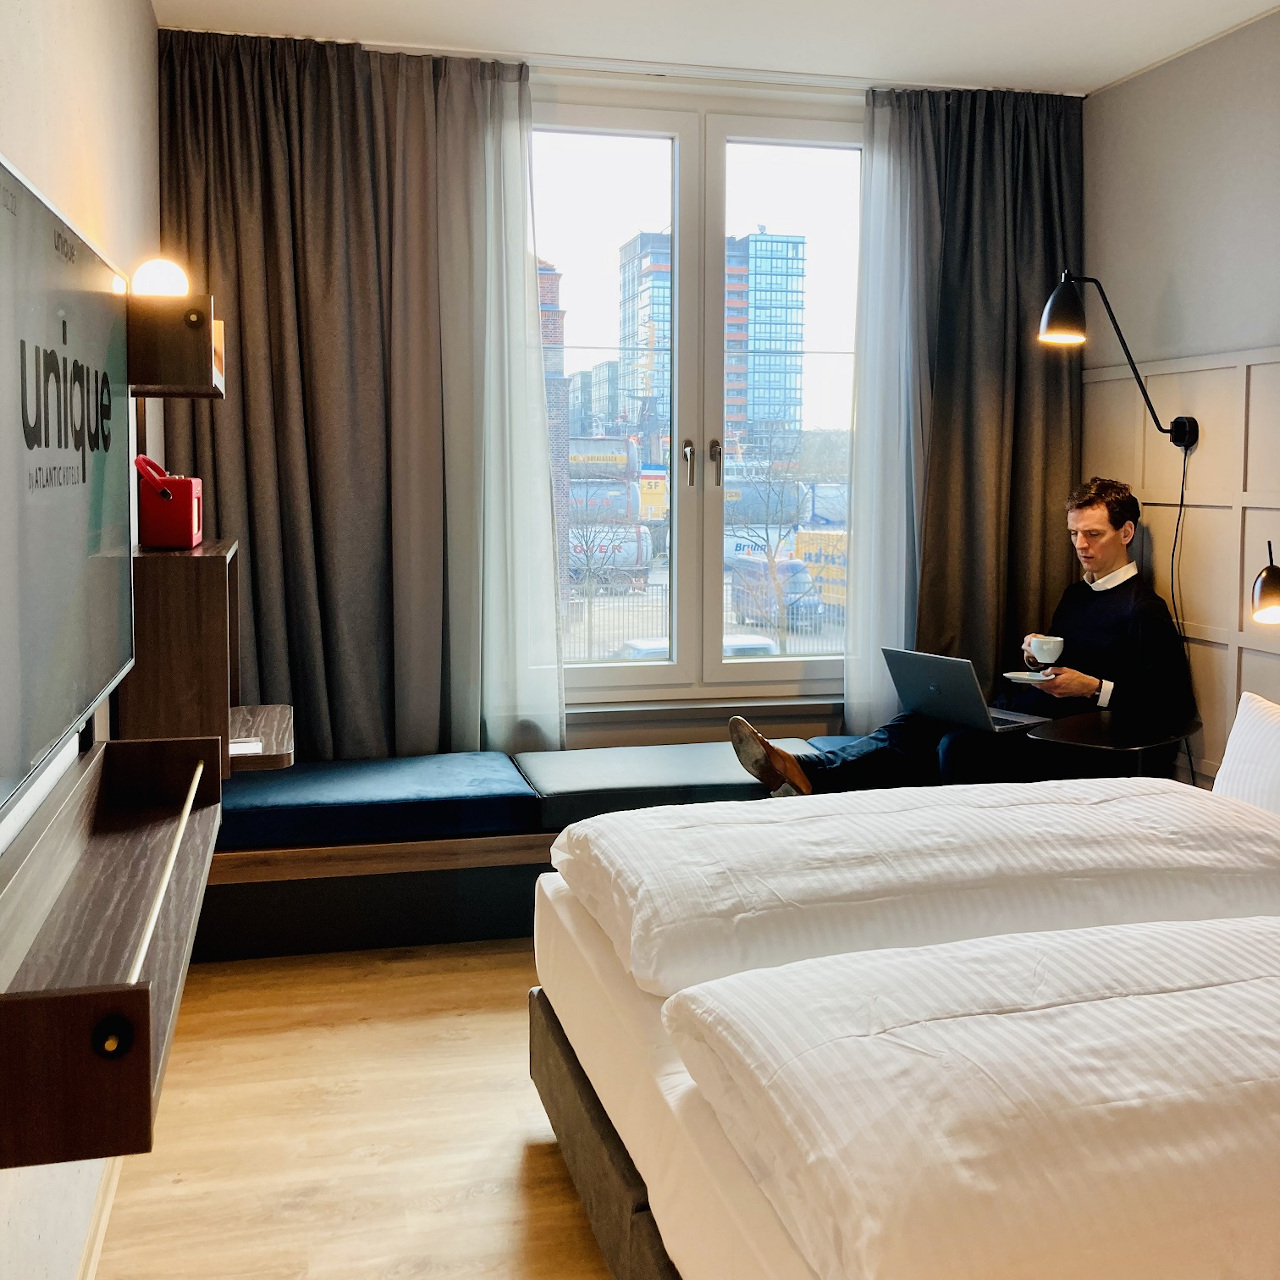 Working at the window in the room | unique by ATLANTIC Hotels Kiel